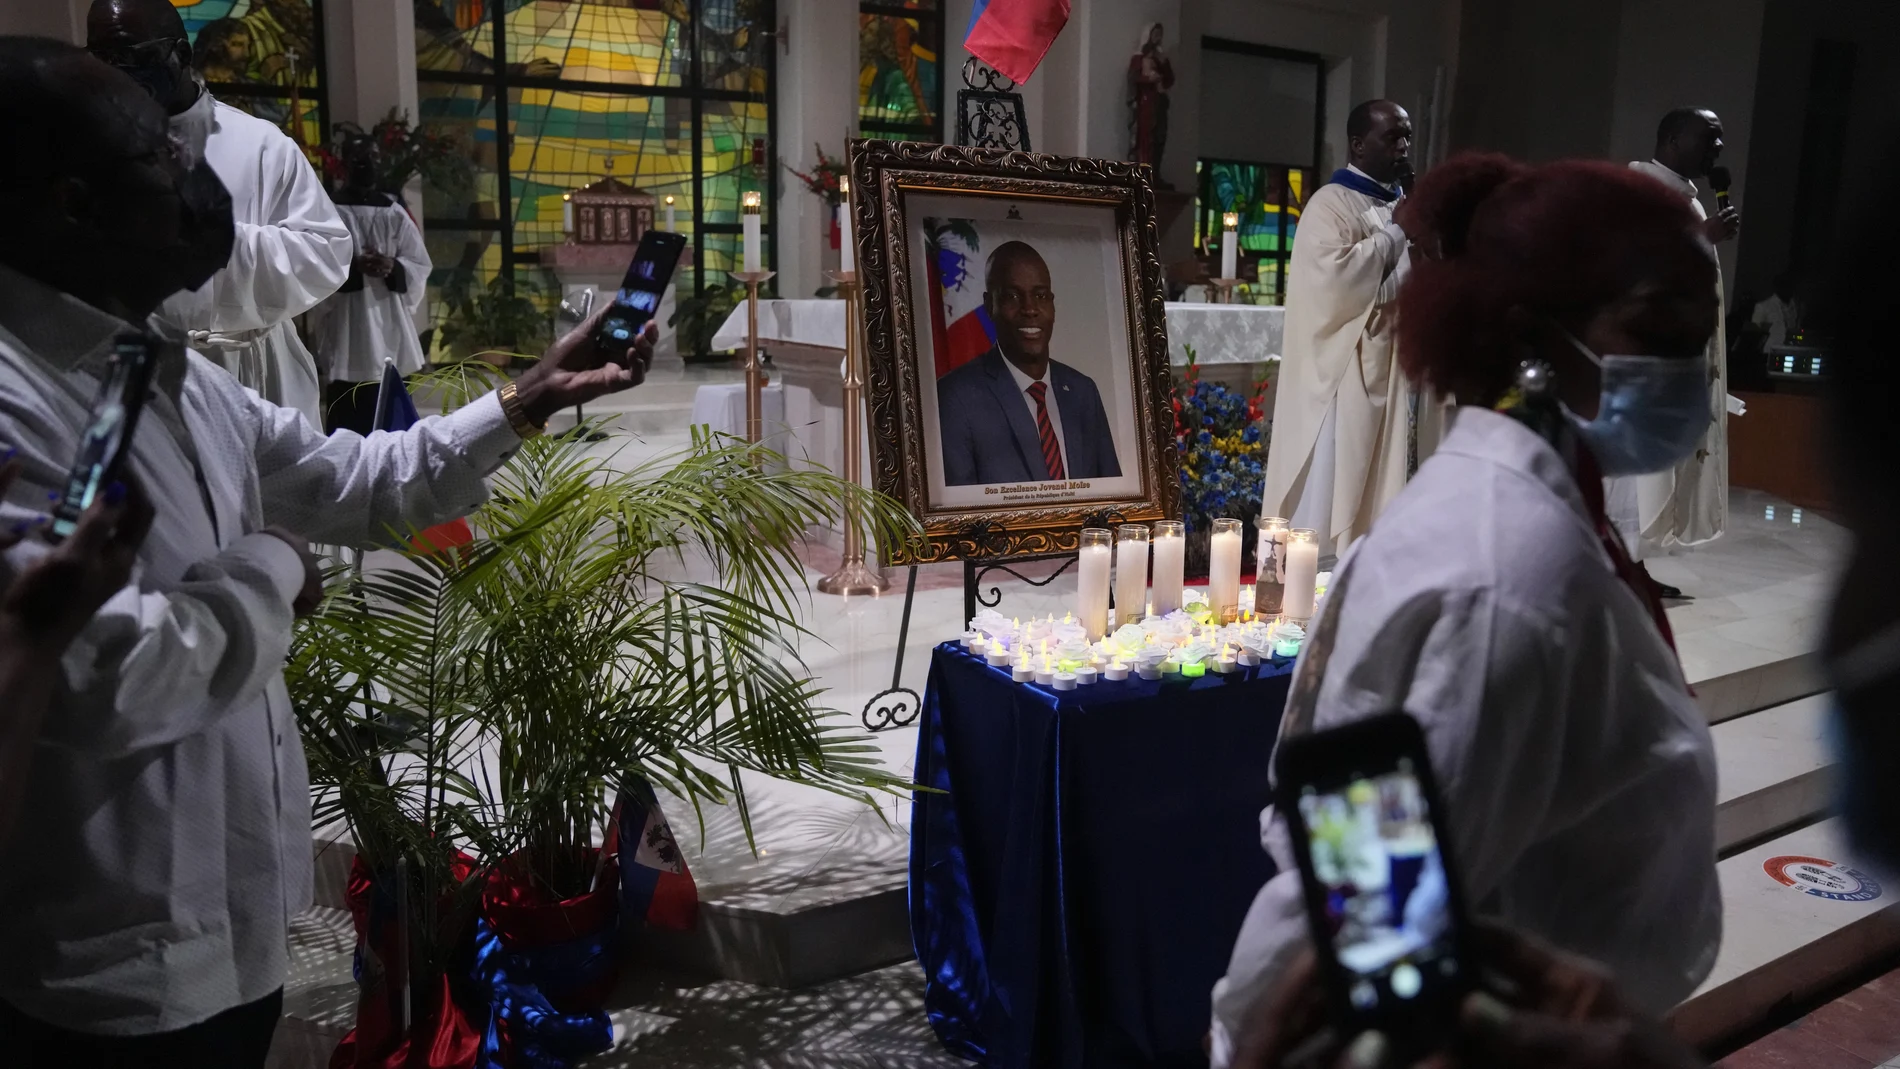 Mourners take pictures of electric candles resting in front of a portrait of Haiti's assassinated President Jovenel MoÃ¯se, during a memorial service at Notre Dame d'Haiti Catholic Church on Thursday, July 22, 2021, in the Little Haiti neighborhood of Miami. Miami's Haitian Consul General hosted the service for members of the city's large Haitian community to pray for the troubled nation and pay their respects to the president, who was slain in a July 7 attack at his home which left his wife seriously wounded. (AP Photo/Rebecca Blackwell)